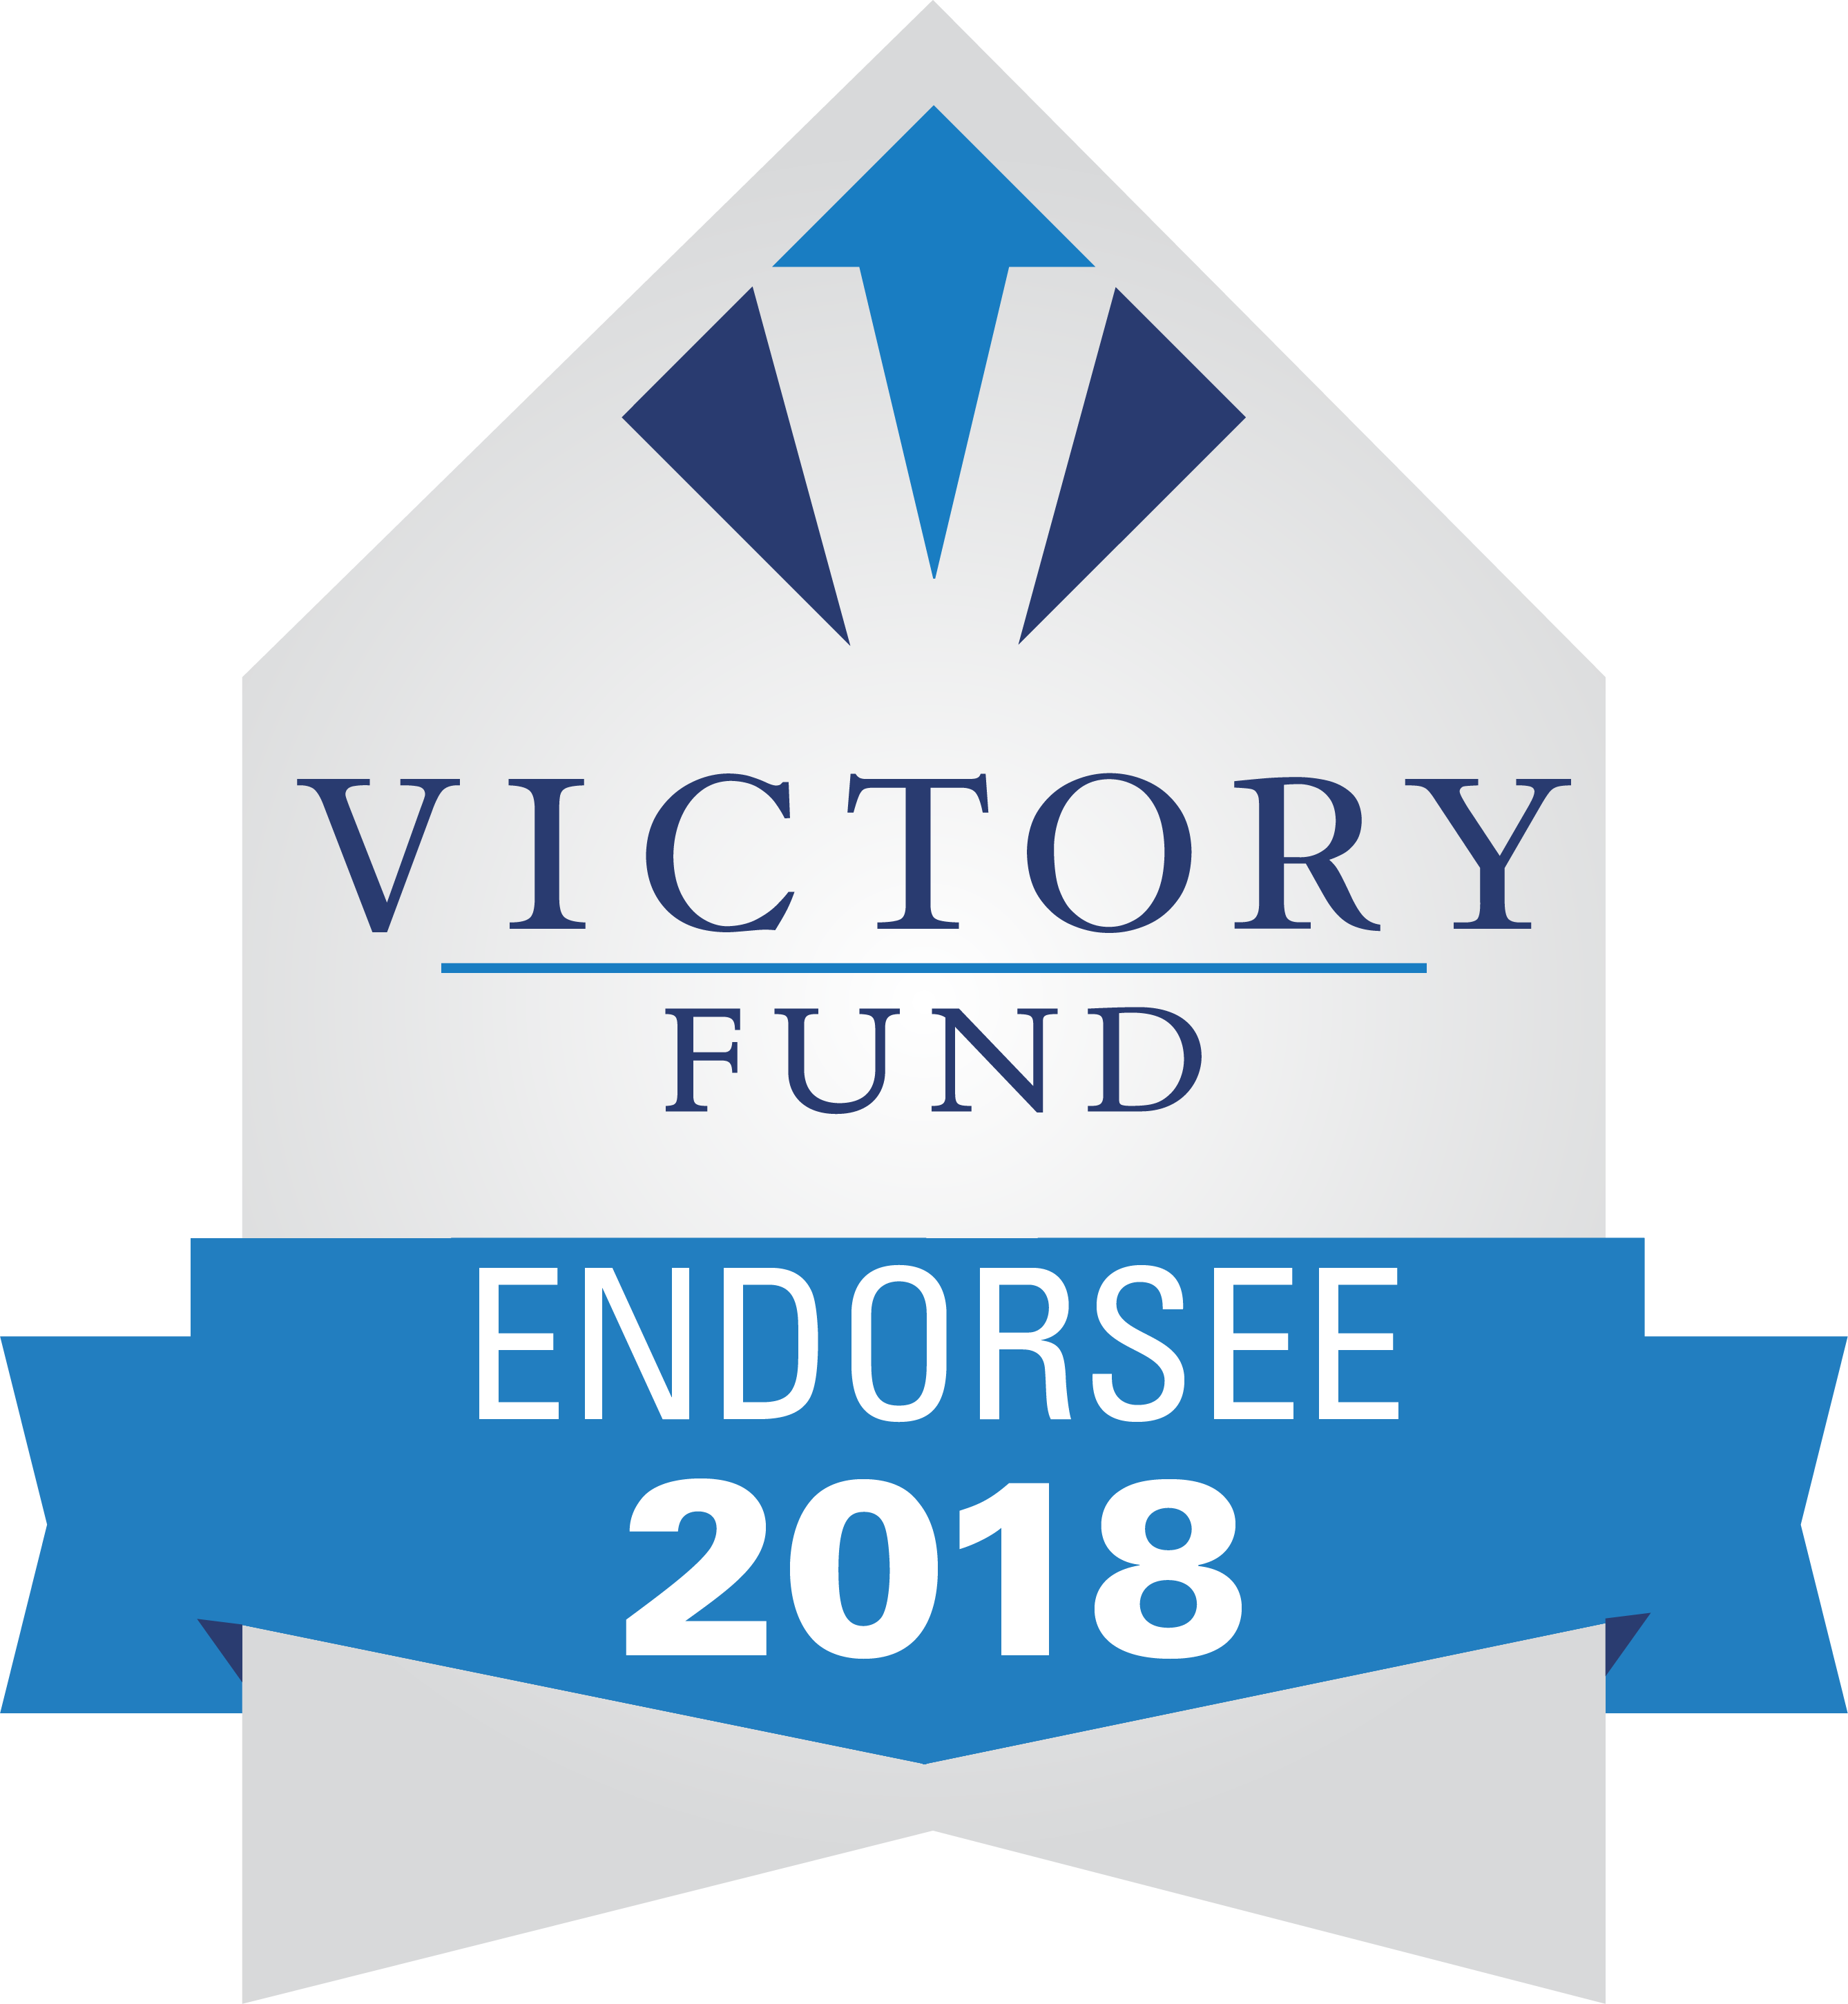 Victory Fund Endorsee 2018